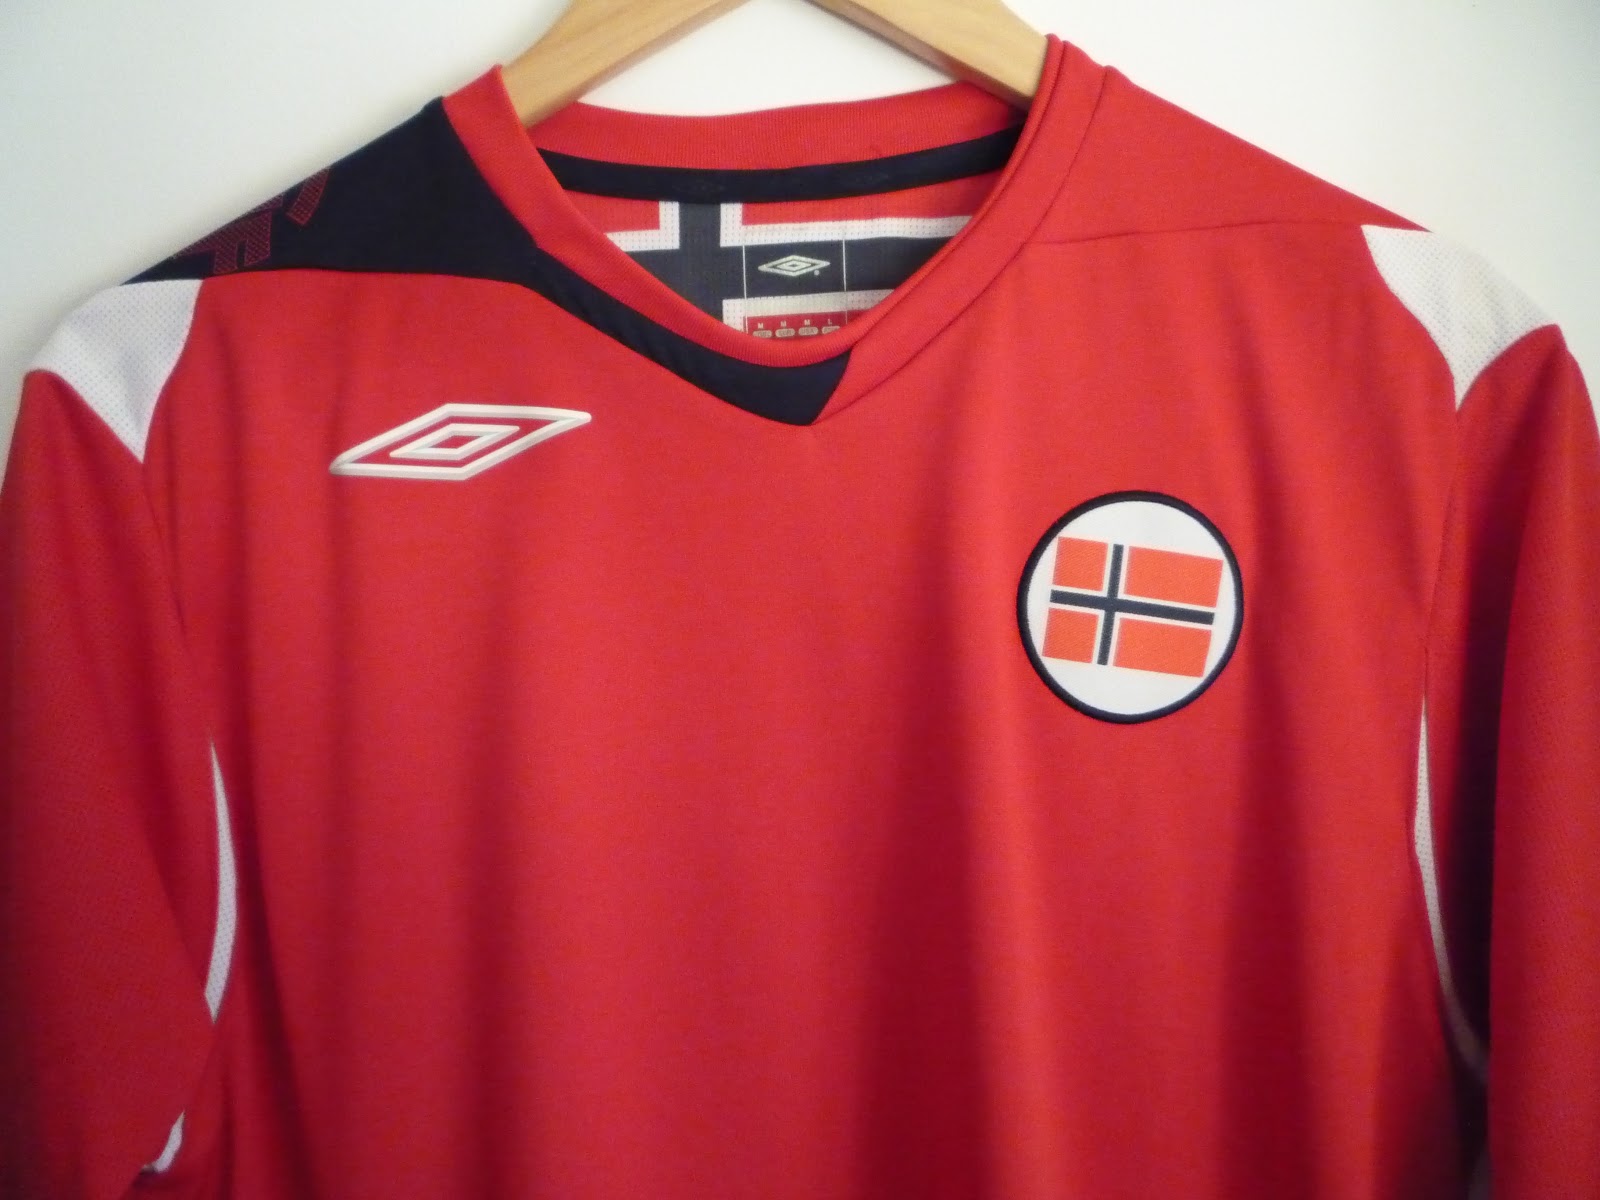 Football Uniforms | A football shirt collection: #15 Norway (Home, 2007/?)